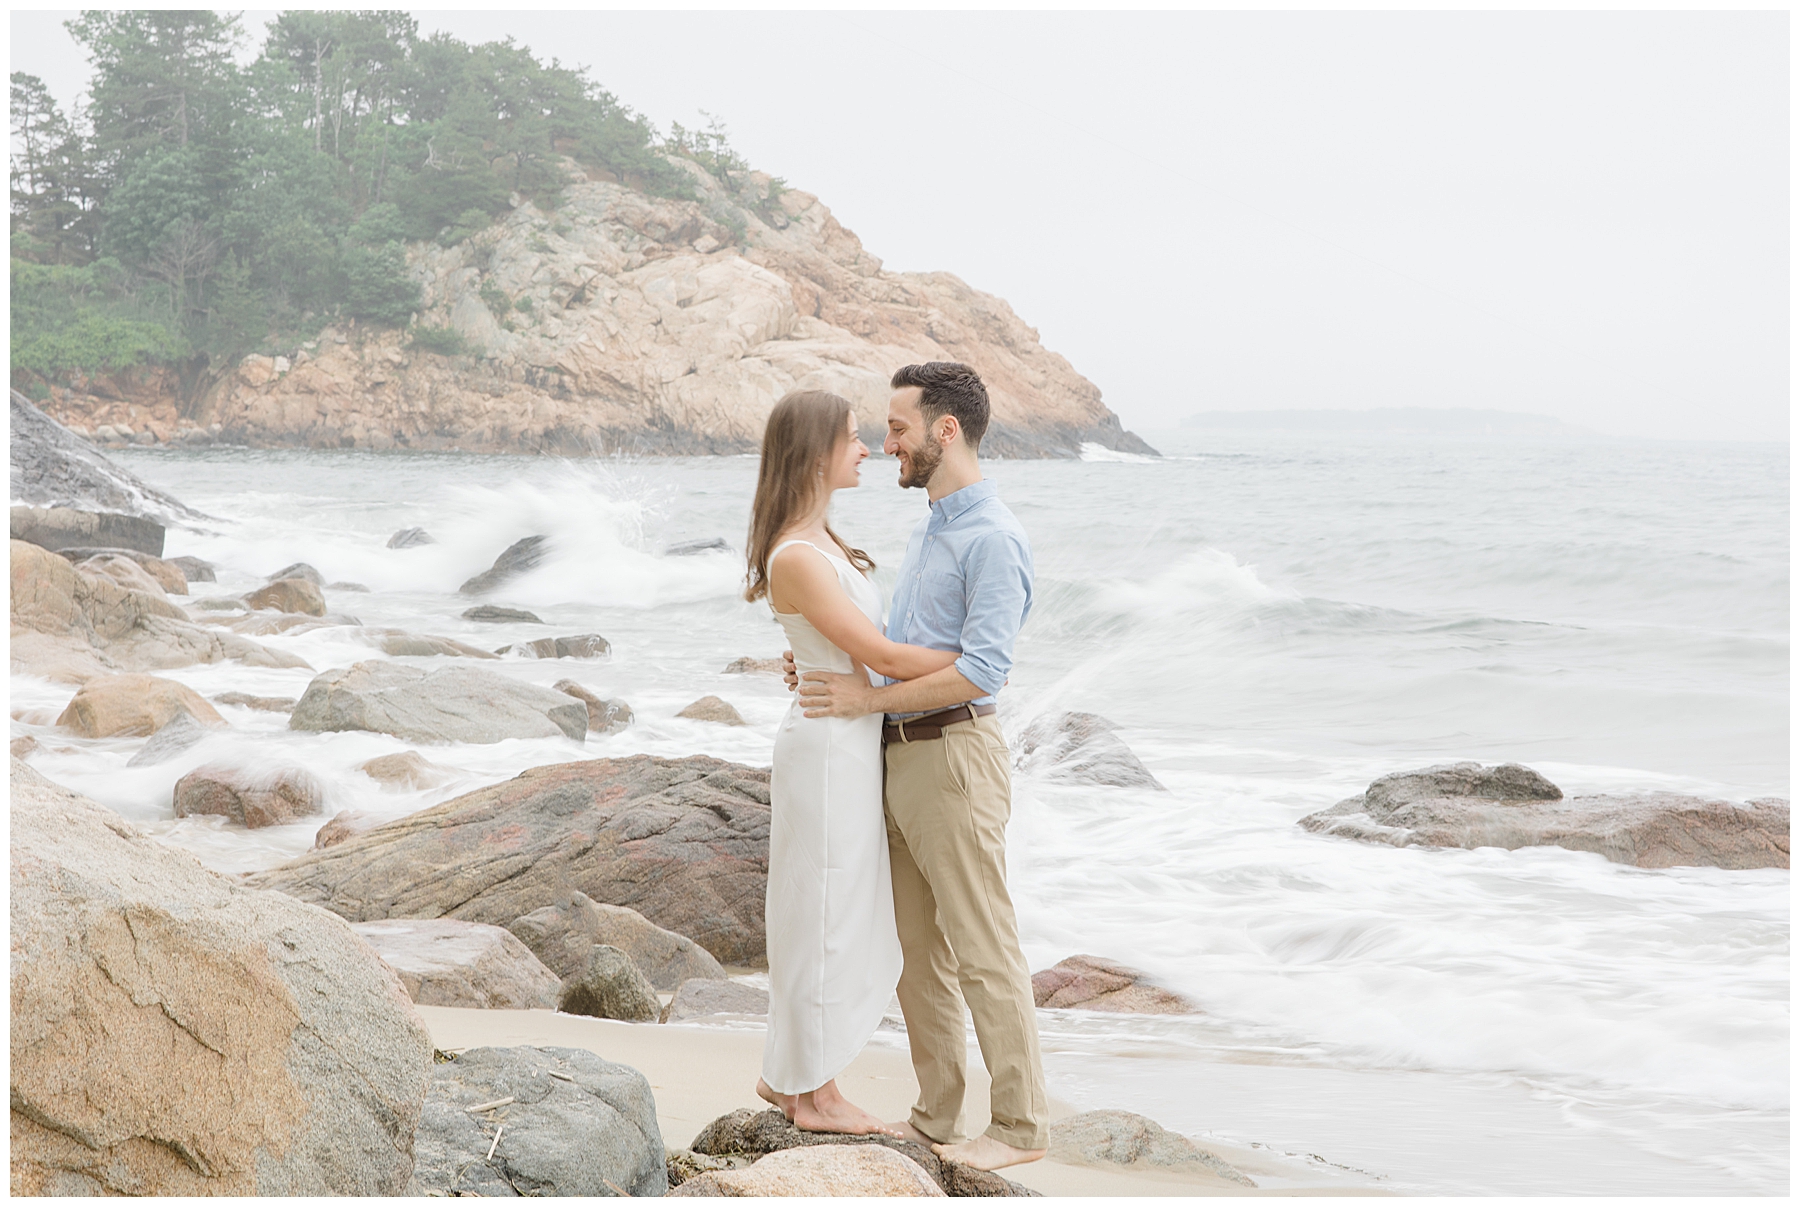 North Shore Beach Engagement on the rocky shore